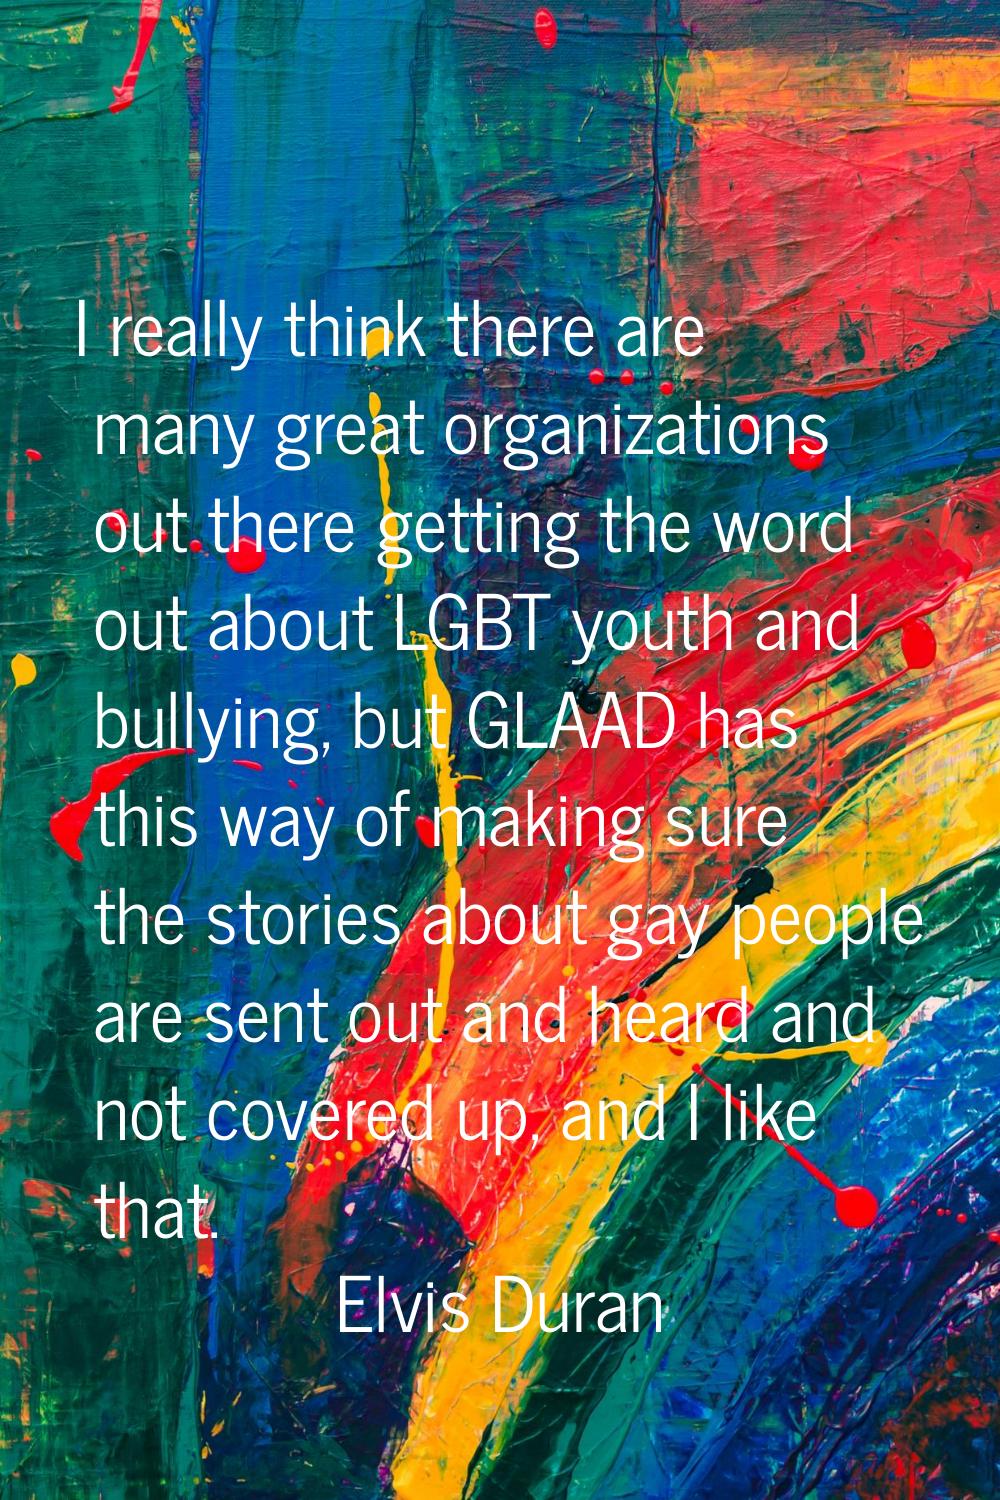 I really think there are many great organizations out there getting the word out about LGBT youth a